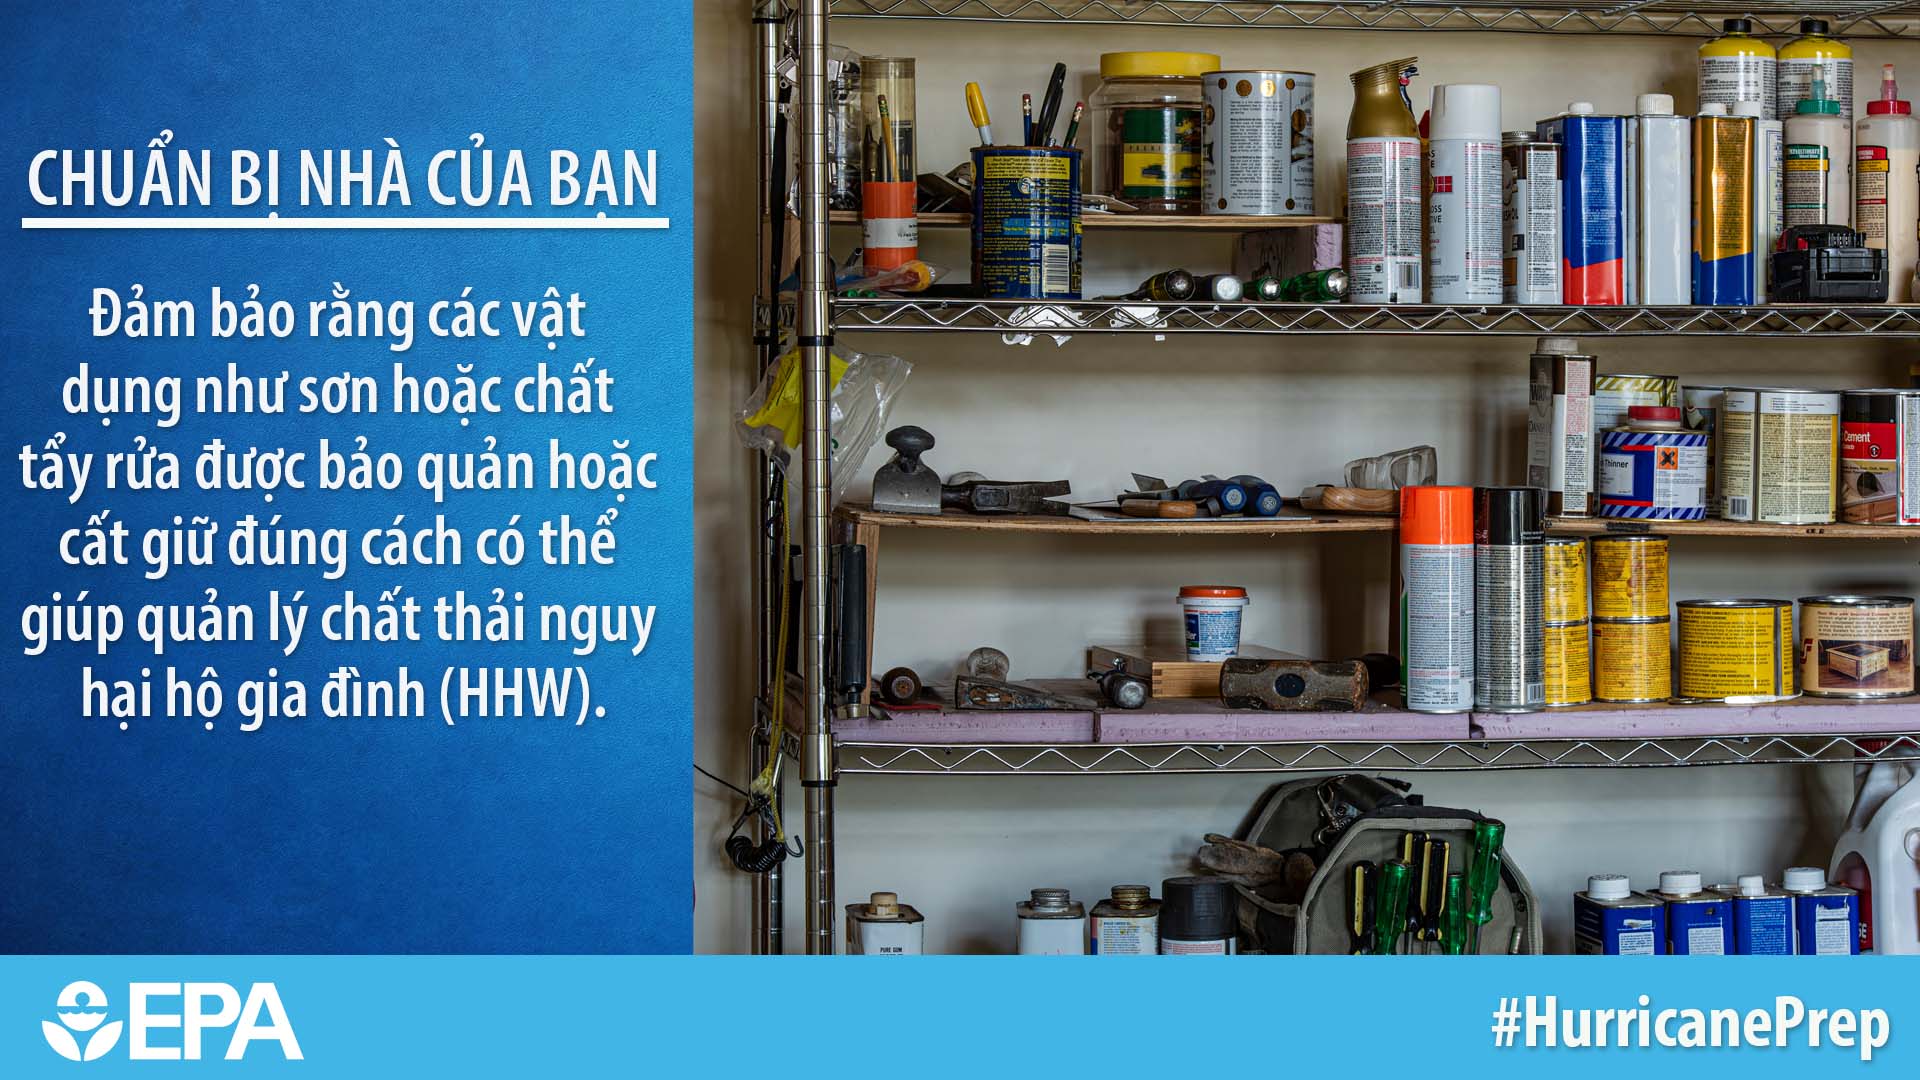 Vietnamese text and photo of shelves full of household cleaning products and goods